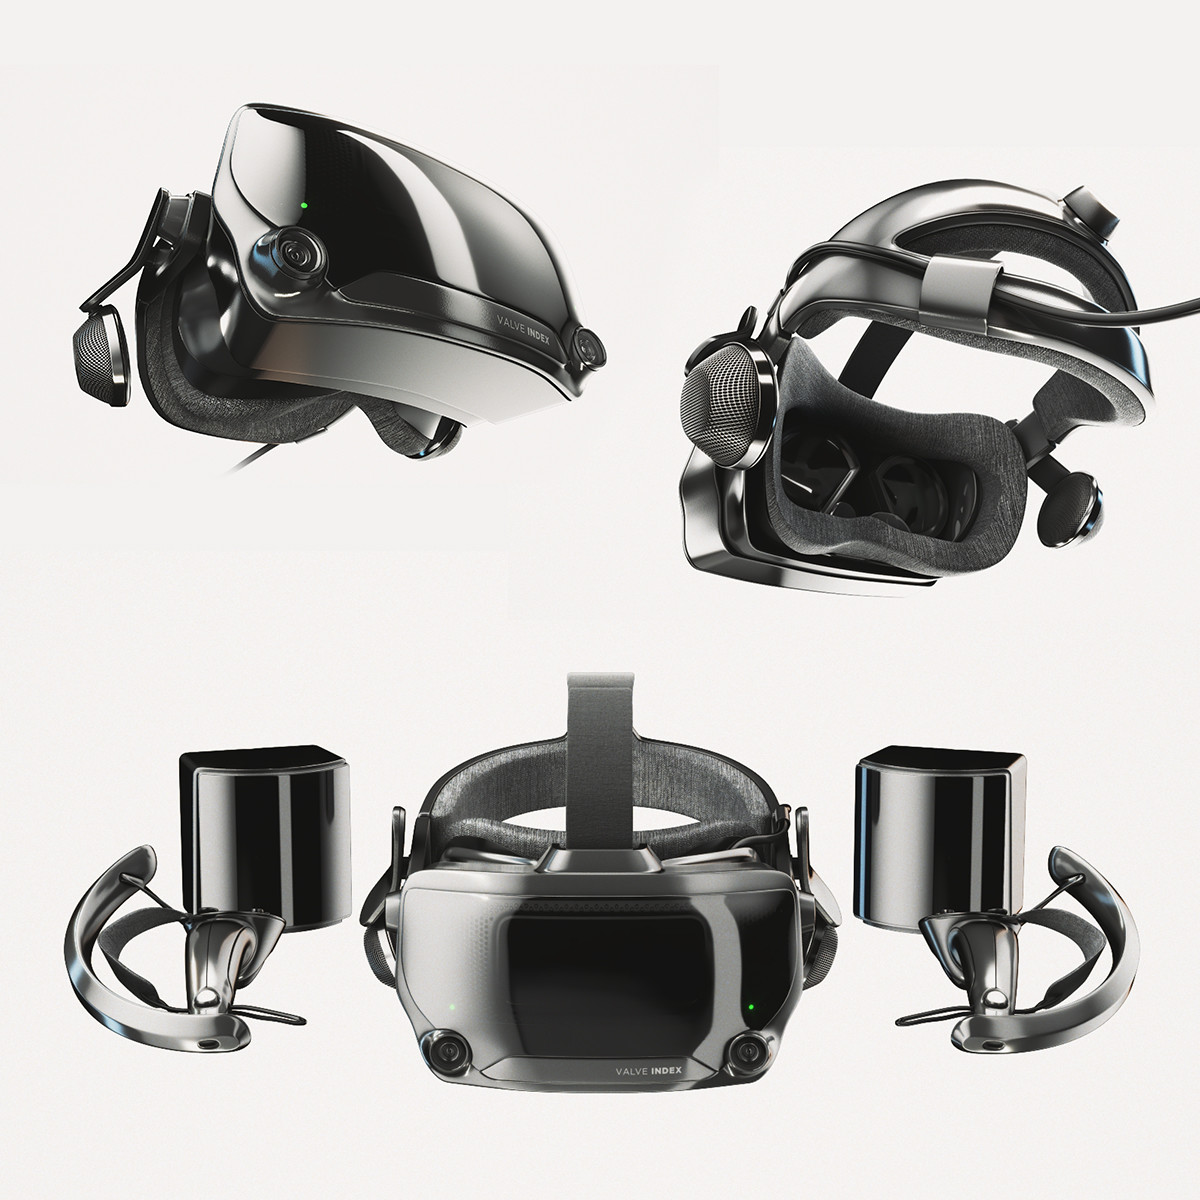 Valve Index VR headset with controllers and sensors - full kit 3D model